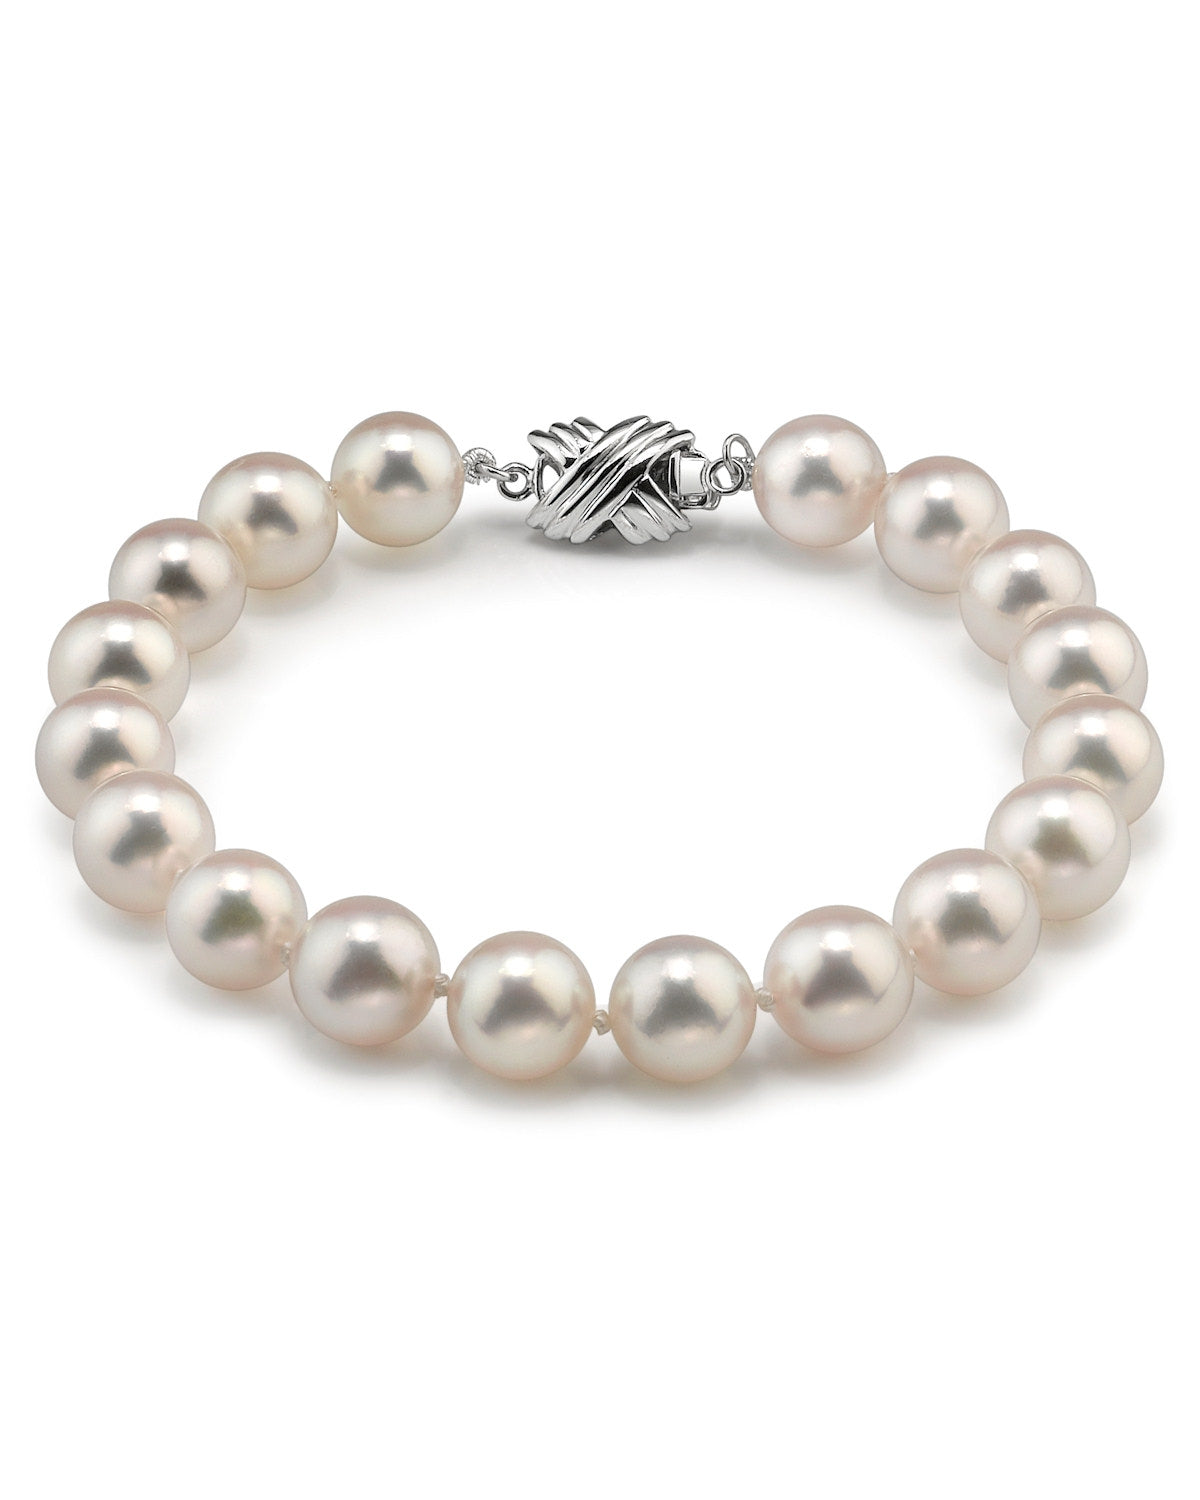 9.5-10.5mm White Freshwater Pearl Bracelet - AAA Quality - Pure Pearls